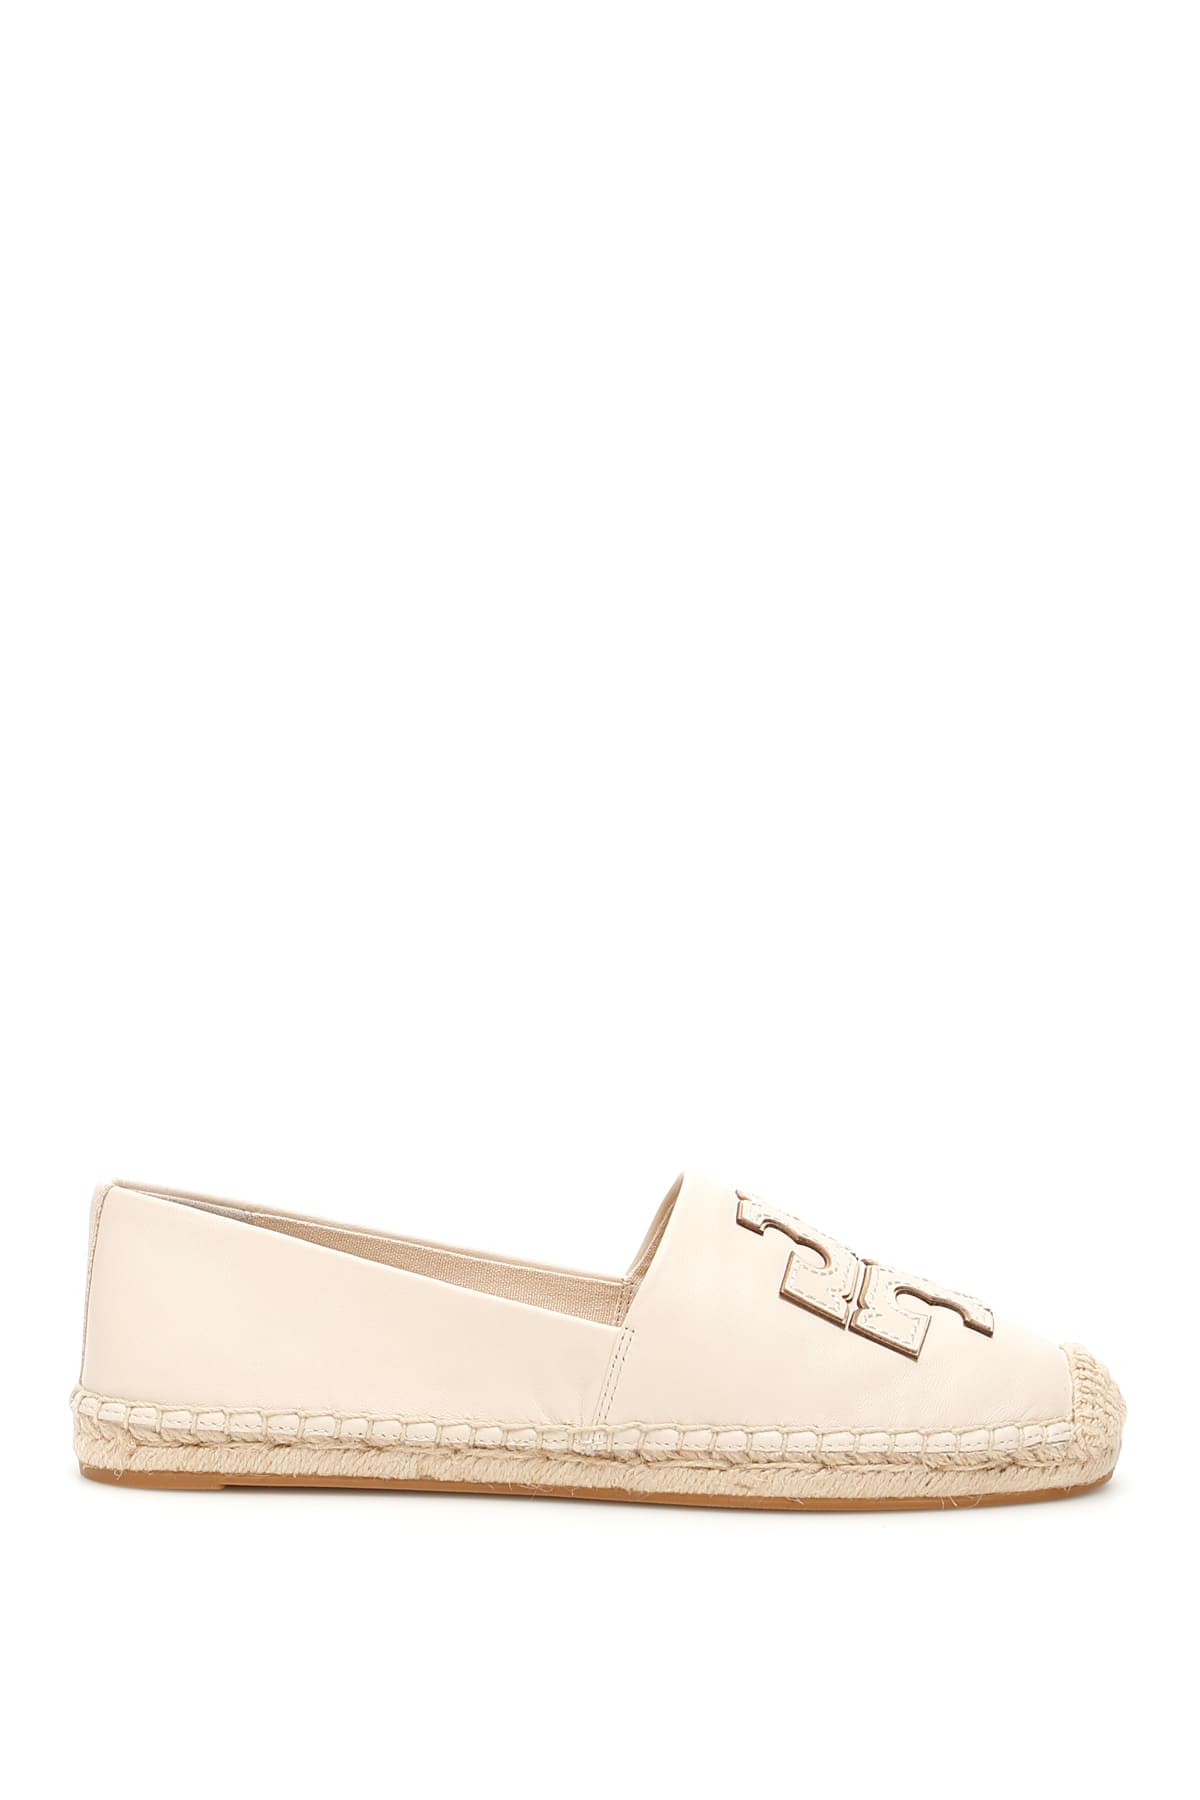 TORY BURCH INES LEATHER ESPADRILLES